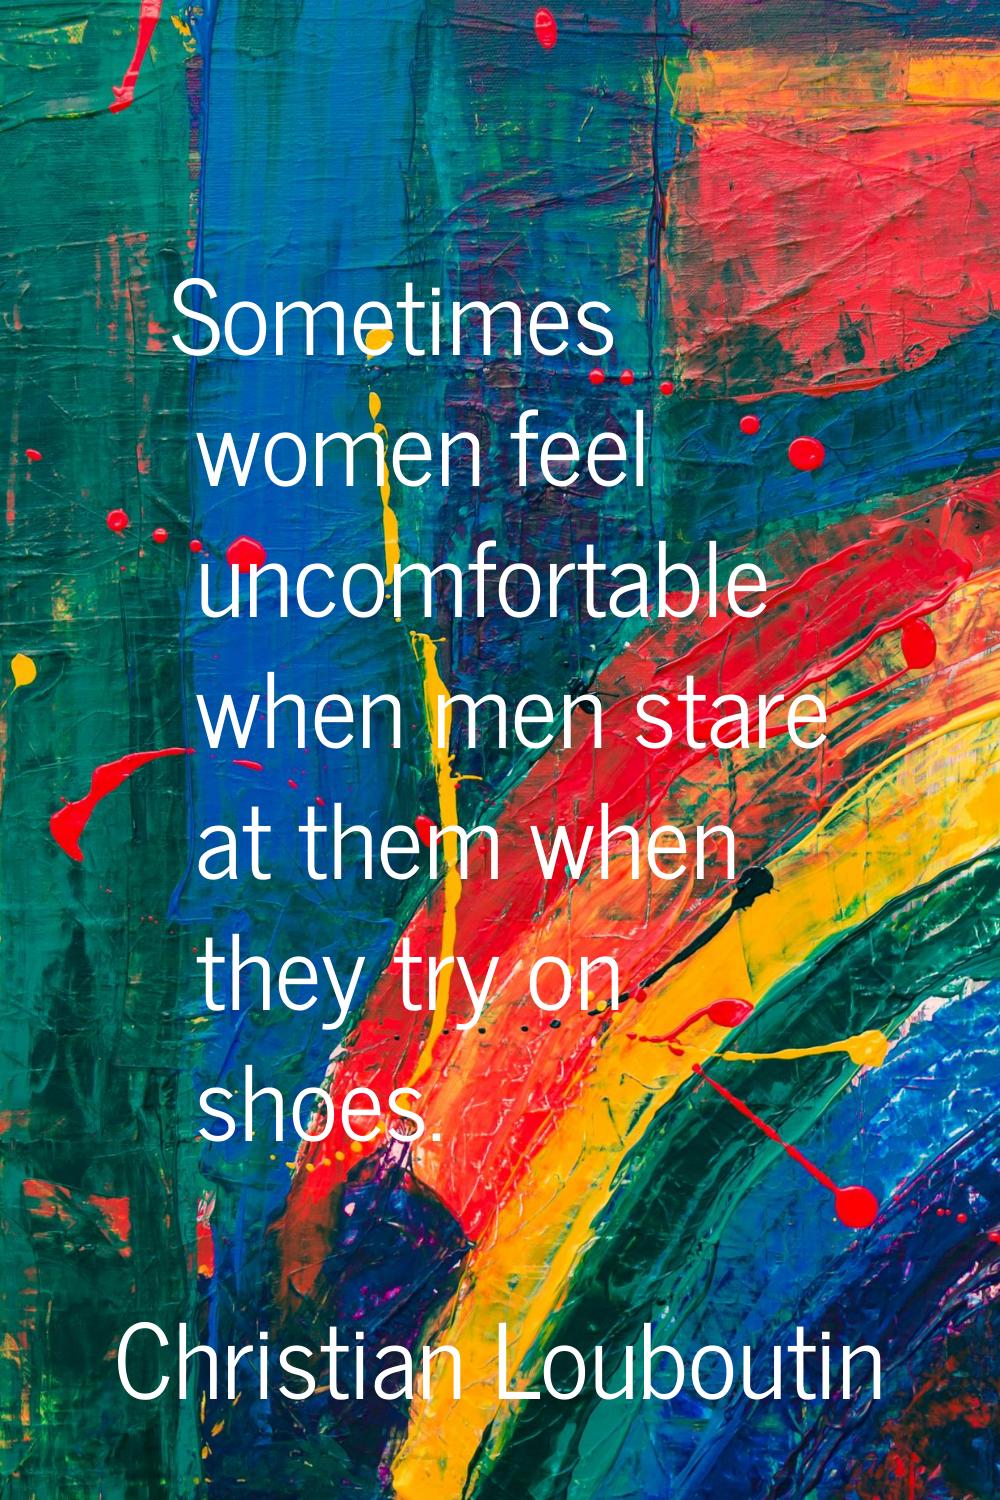 Sometimes women feel uncomfortable when men stare at them when they try on shoes.